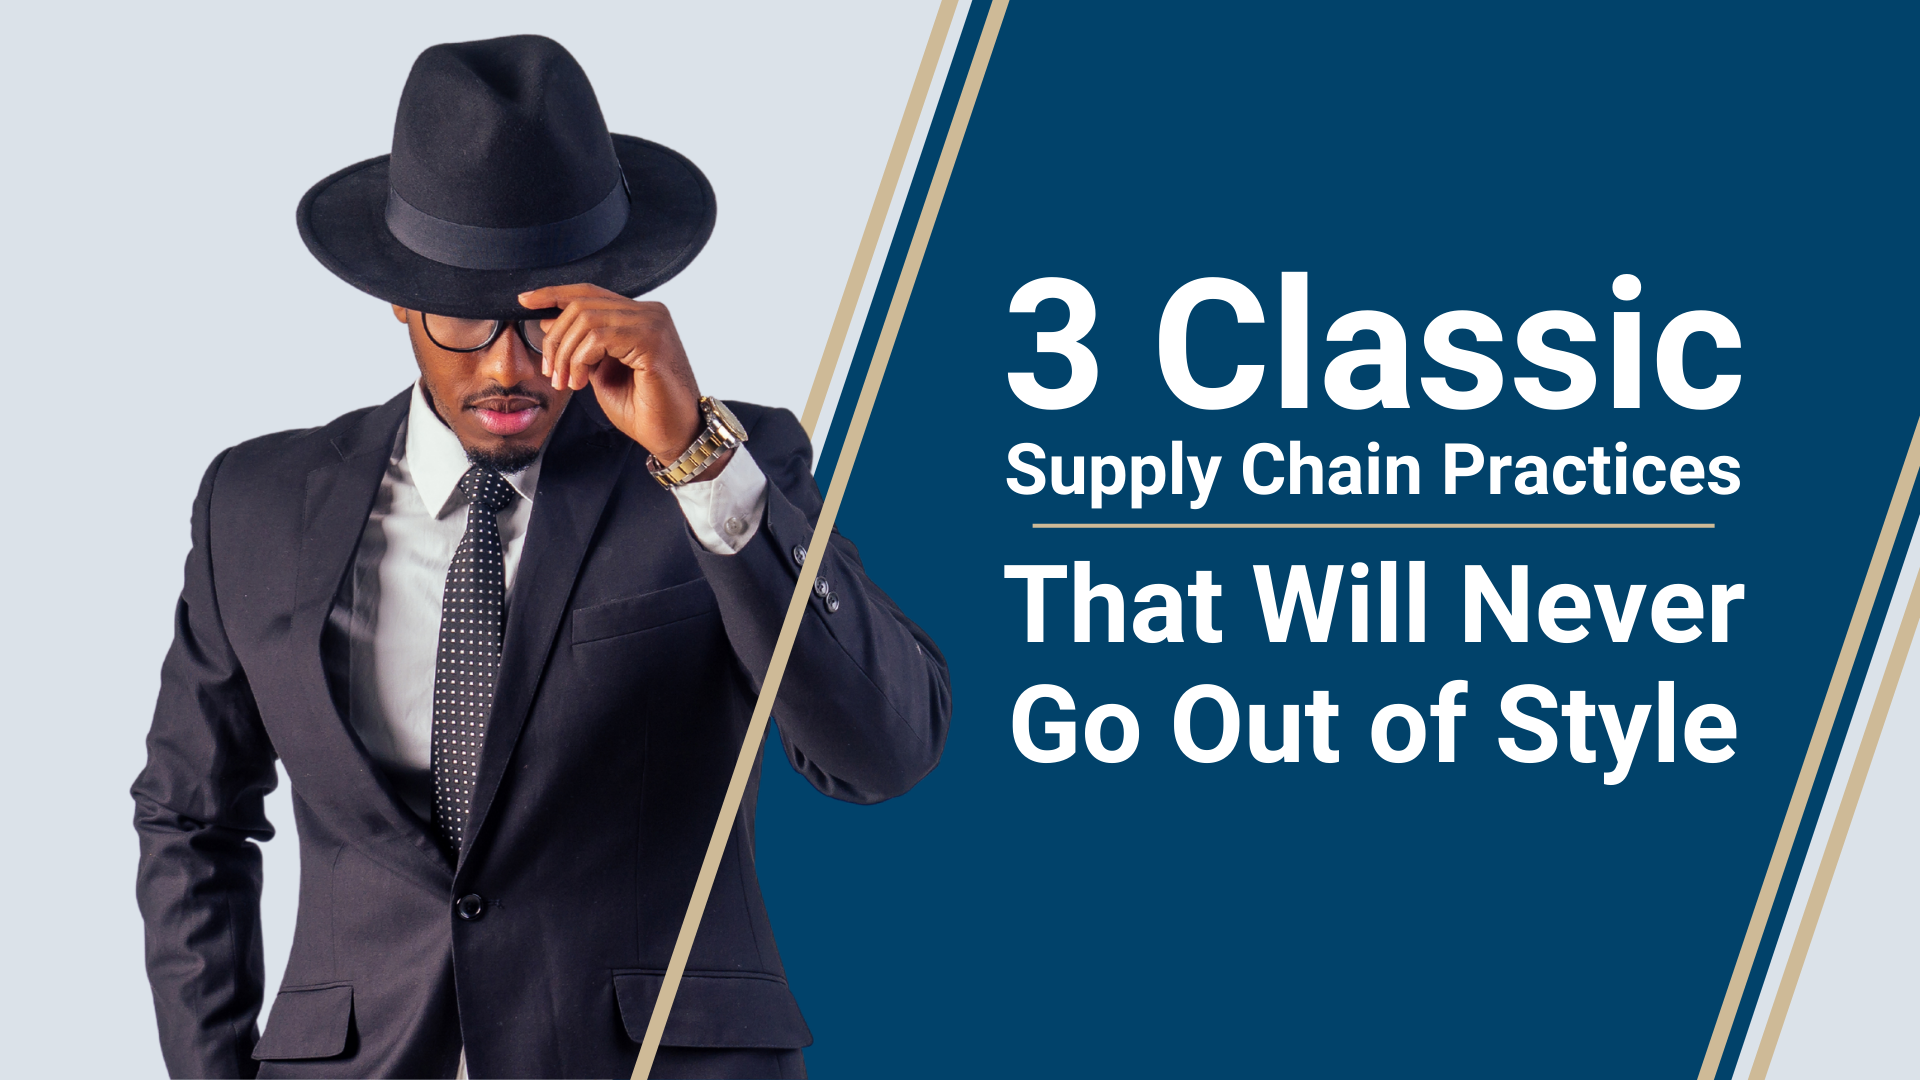 Black man in a suite in a split-screen beside the text "3 Classic Supply Chain Practices That Will Never Go Out of Style"